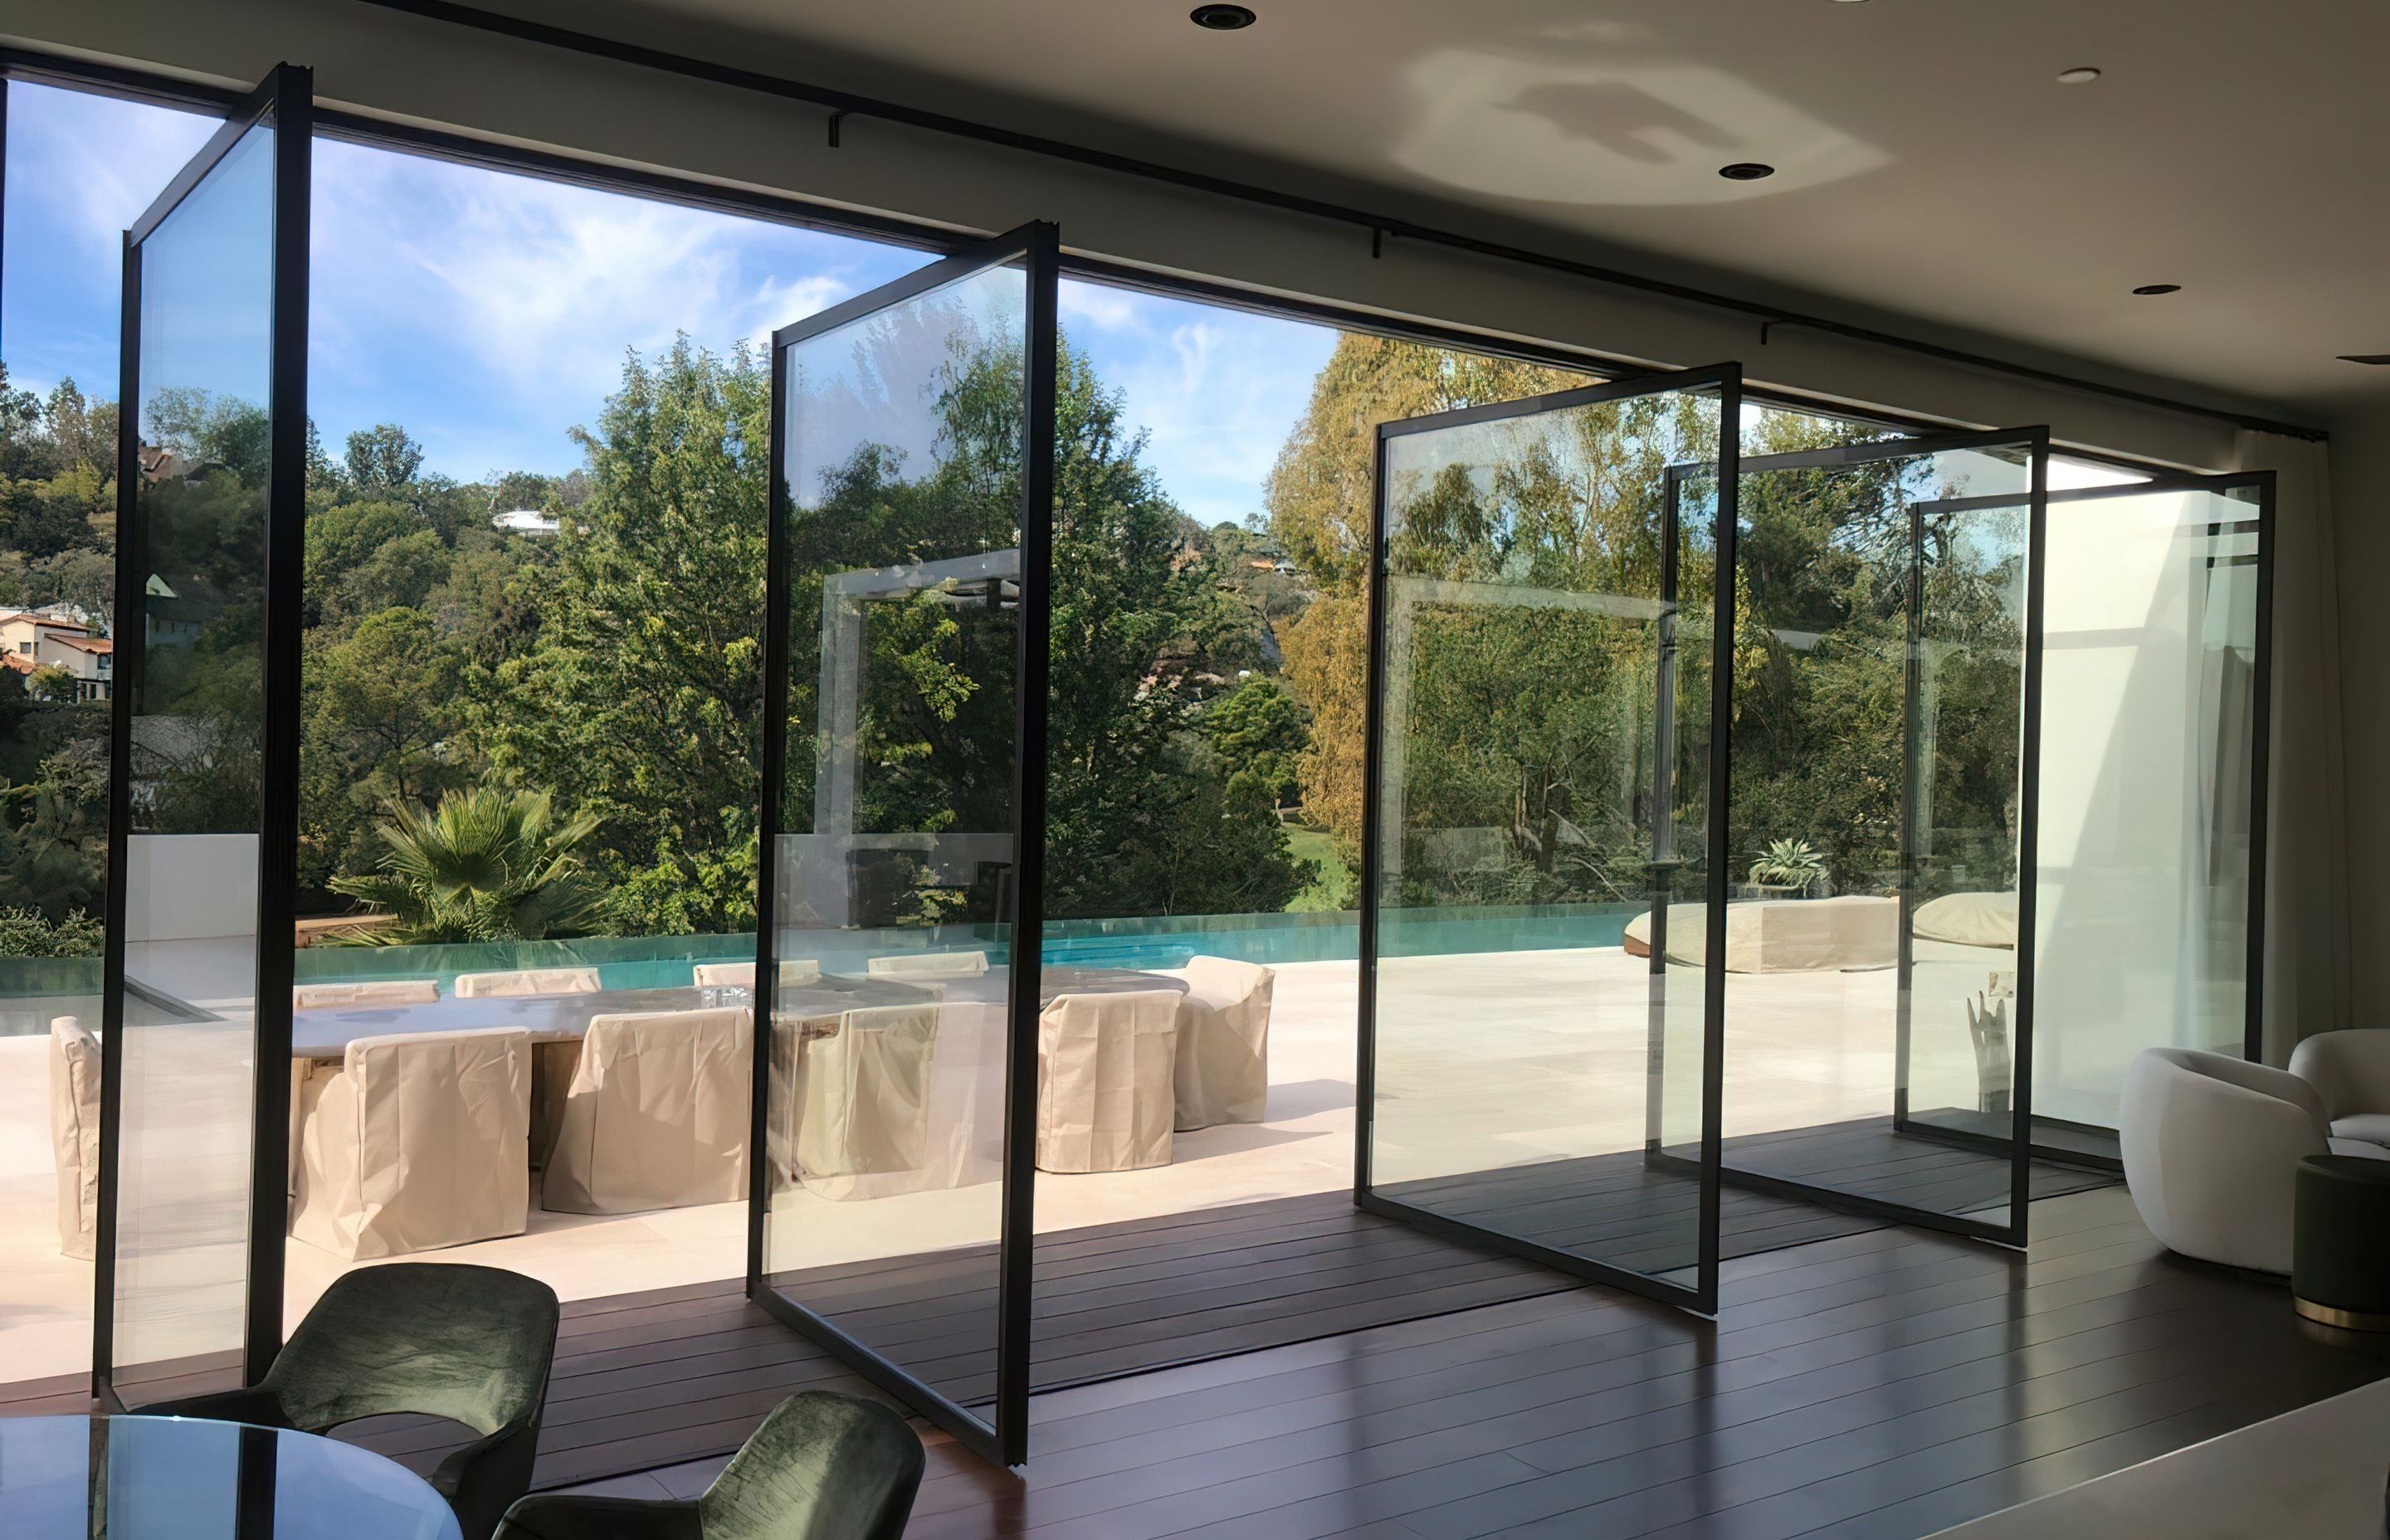 Pivot doors are an airtight solution ideal for large areas.